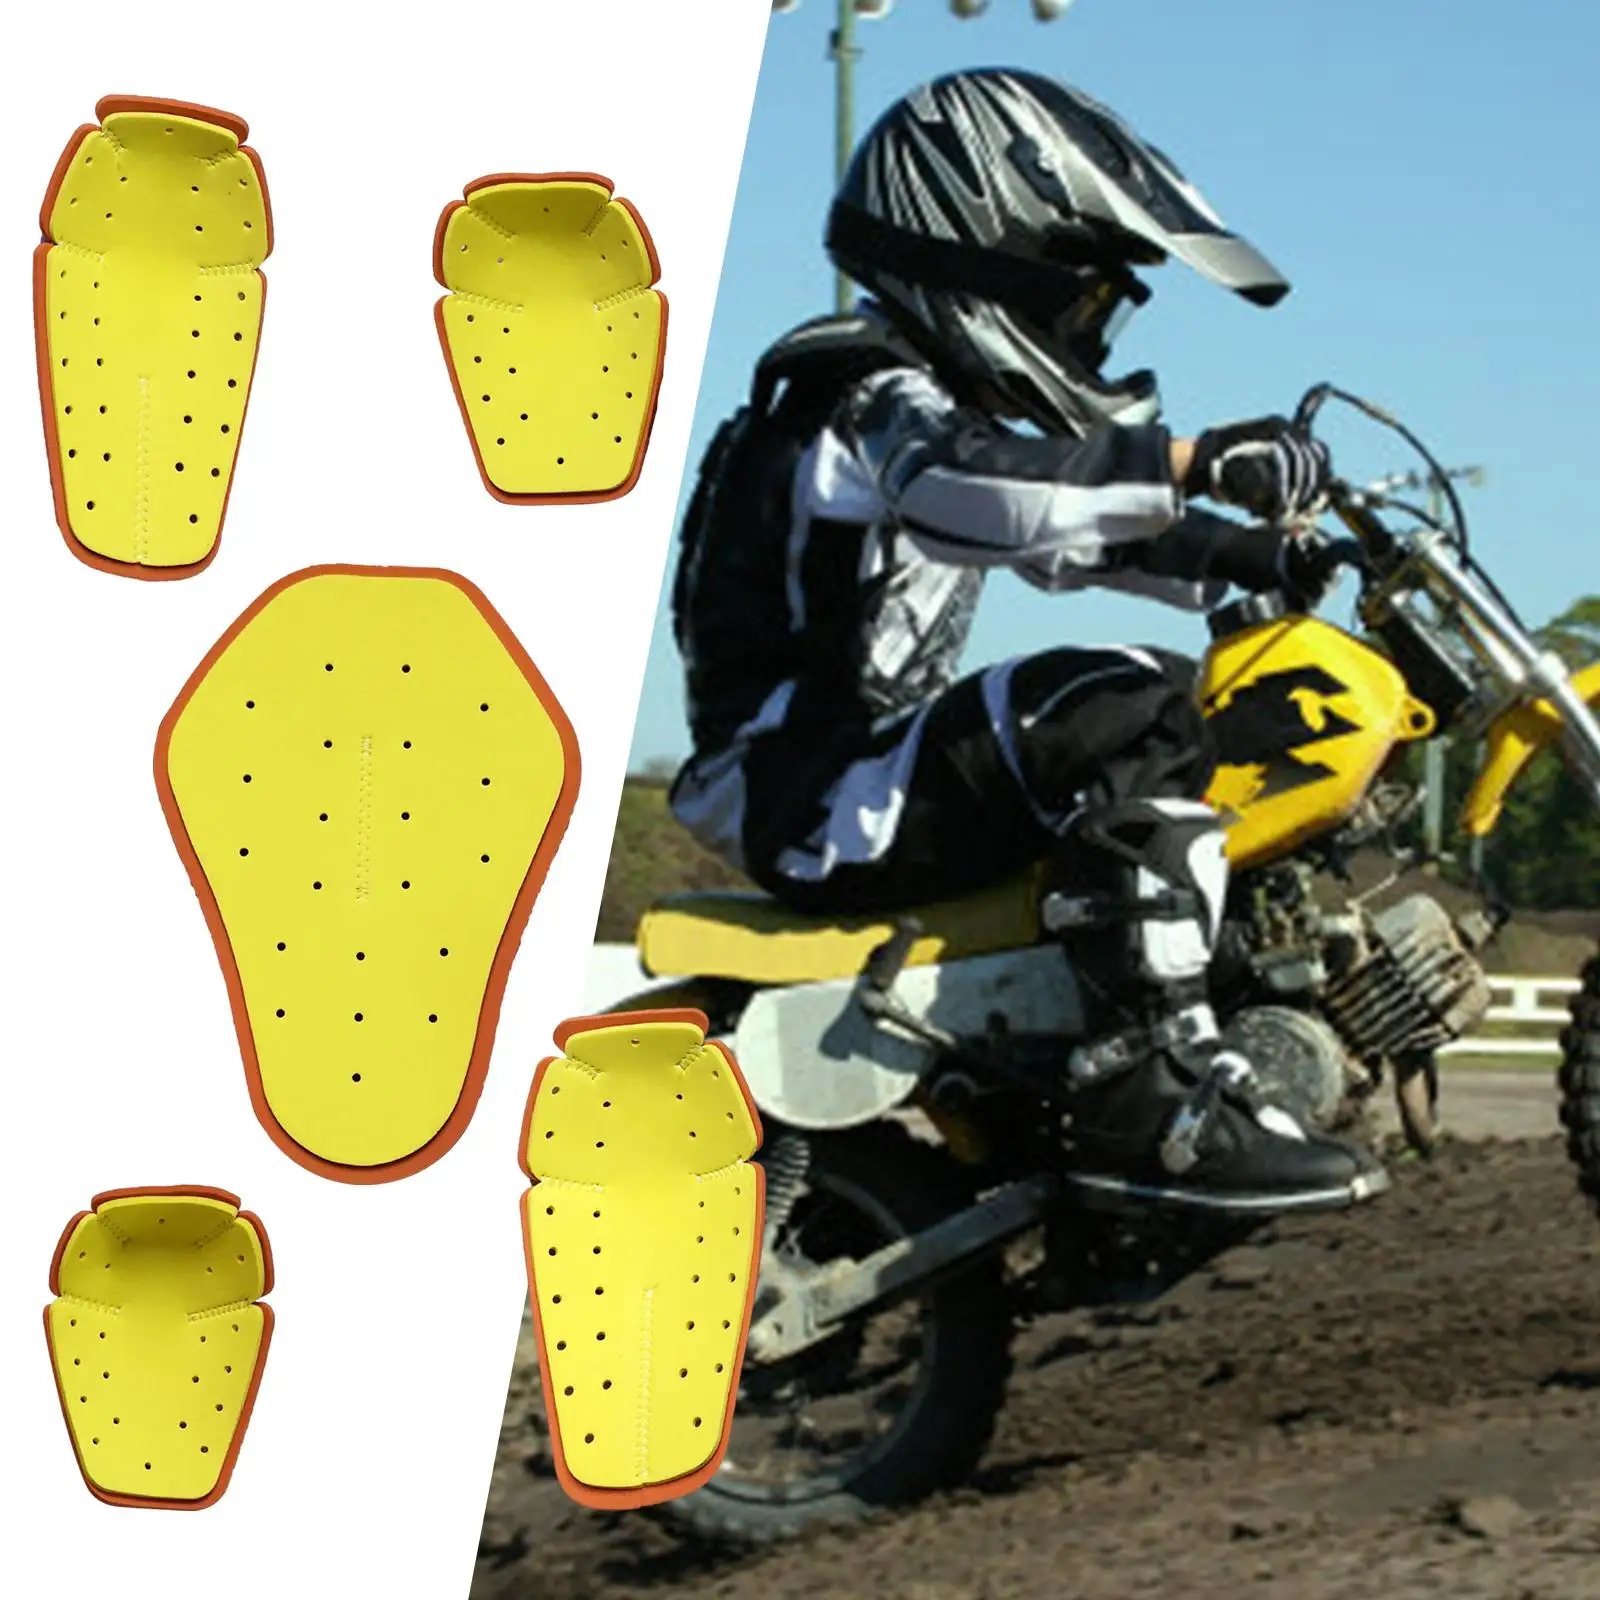 5x Motorbike Protection Pad Motorcycle Accessories Motorcycle Racing Riding Motorbike Body Protective Gear for Motorcycle